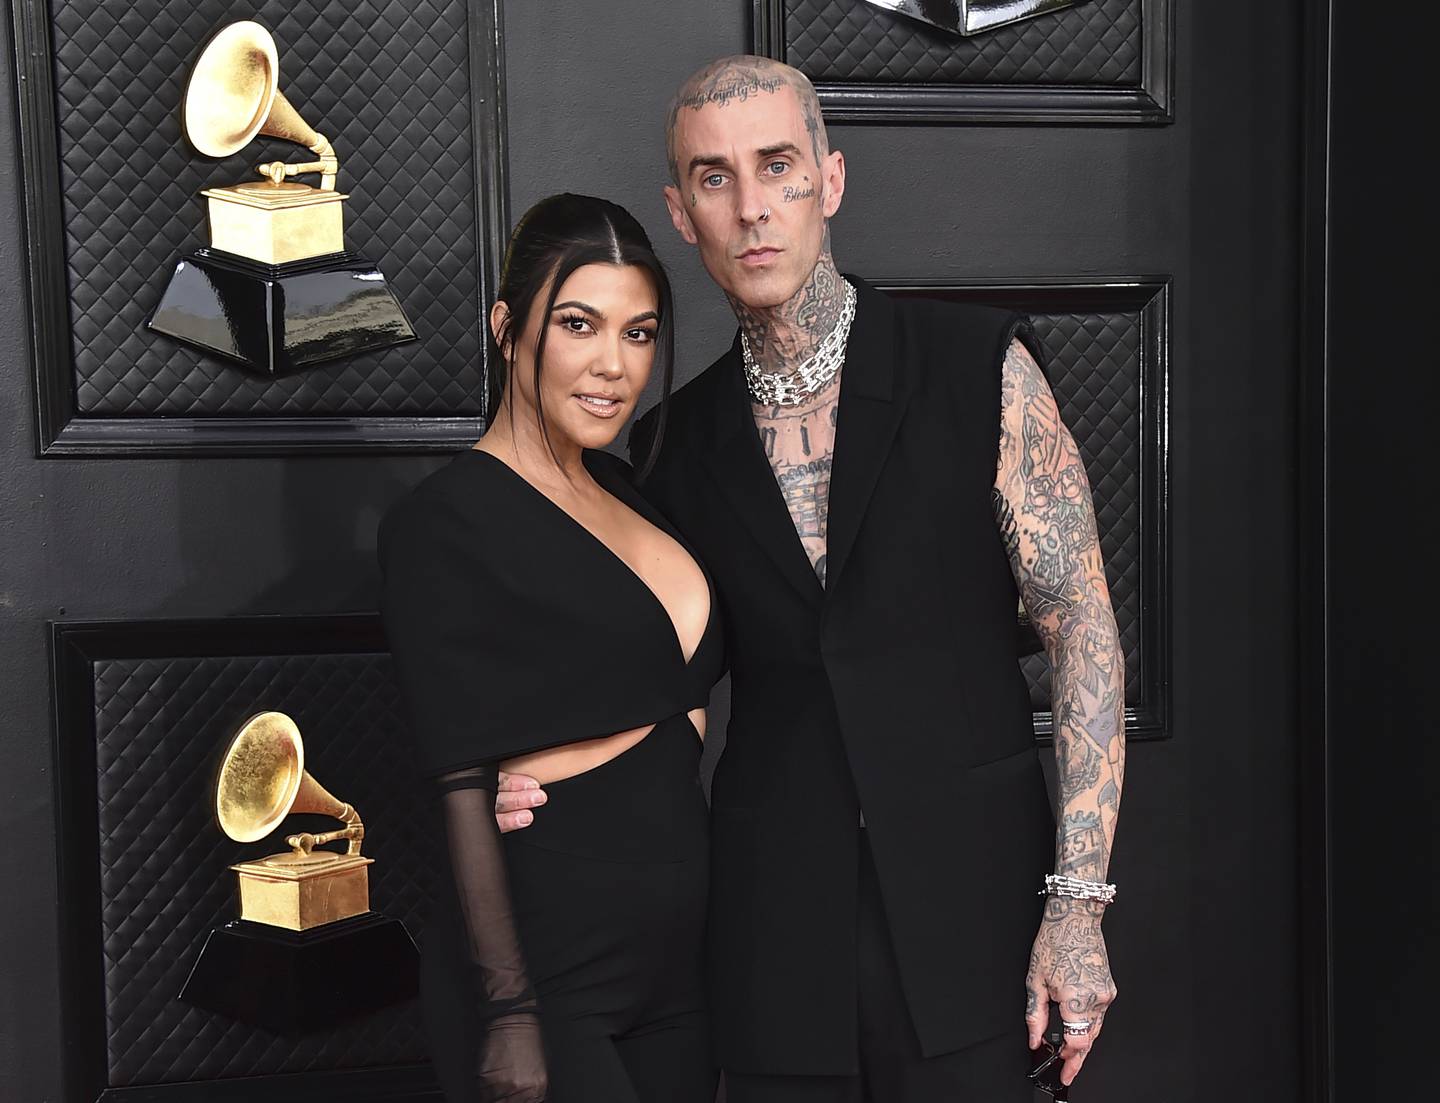 Kourtney Kardashian and Travis Barker had a Las Vegas wedding in the early hours after the 64th Annual Grammy Awards in Las Vegas on April 4, 2022. AP Photo